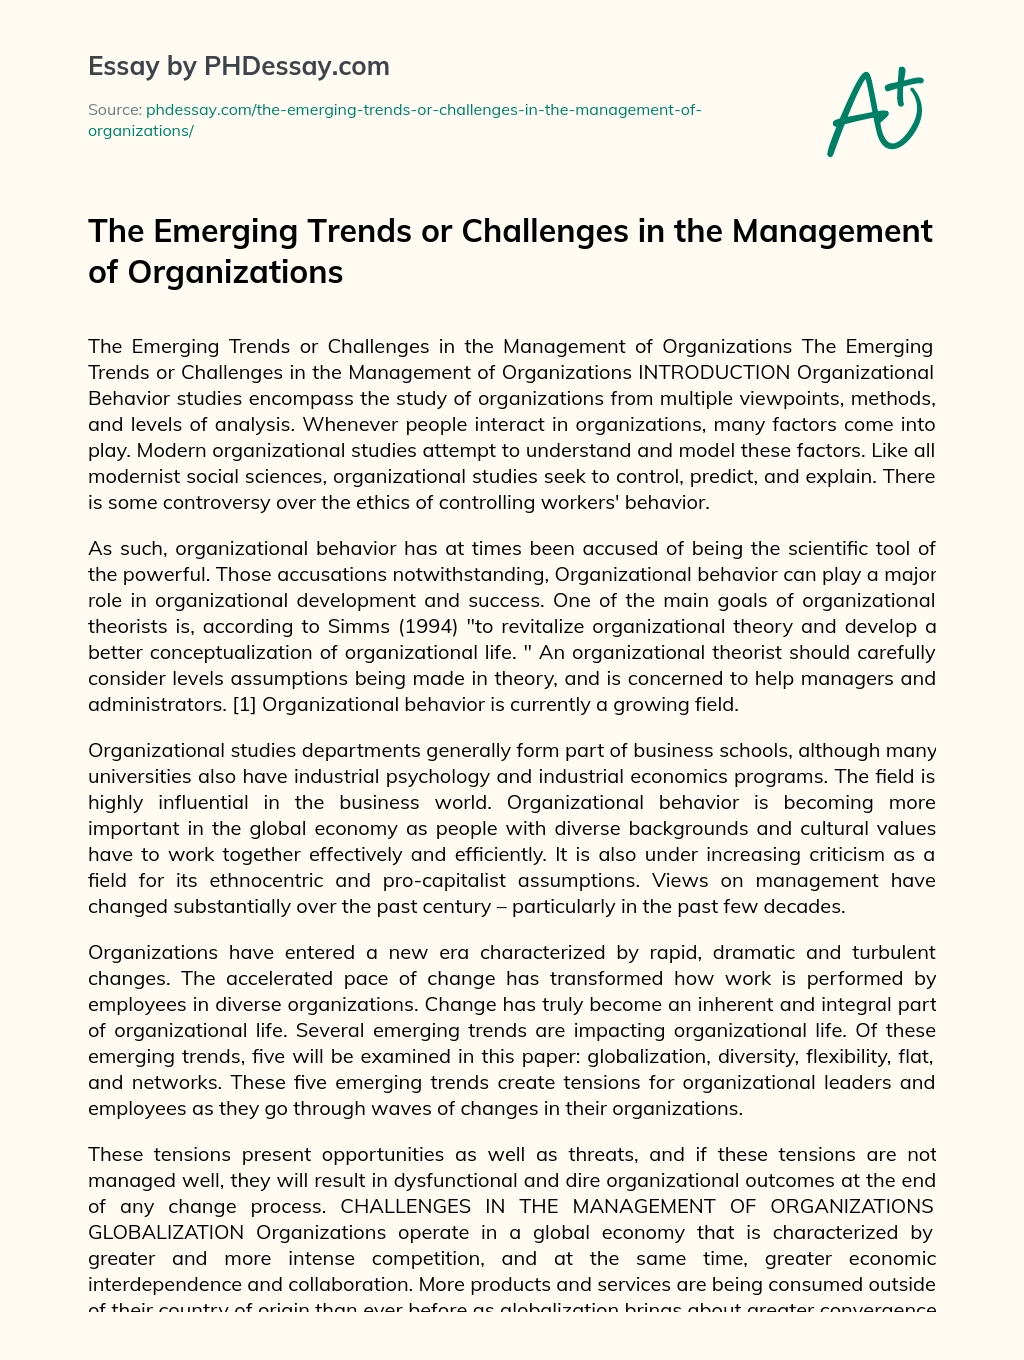 The Emerging Trends or Challenges in the Management of Organizations essay